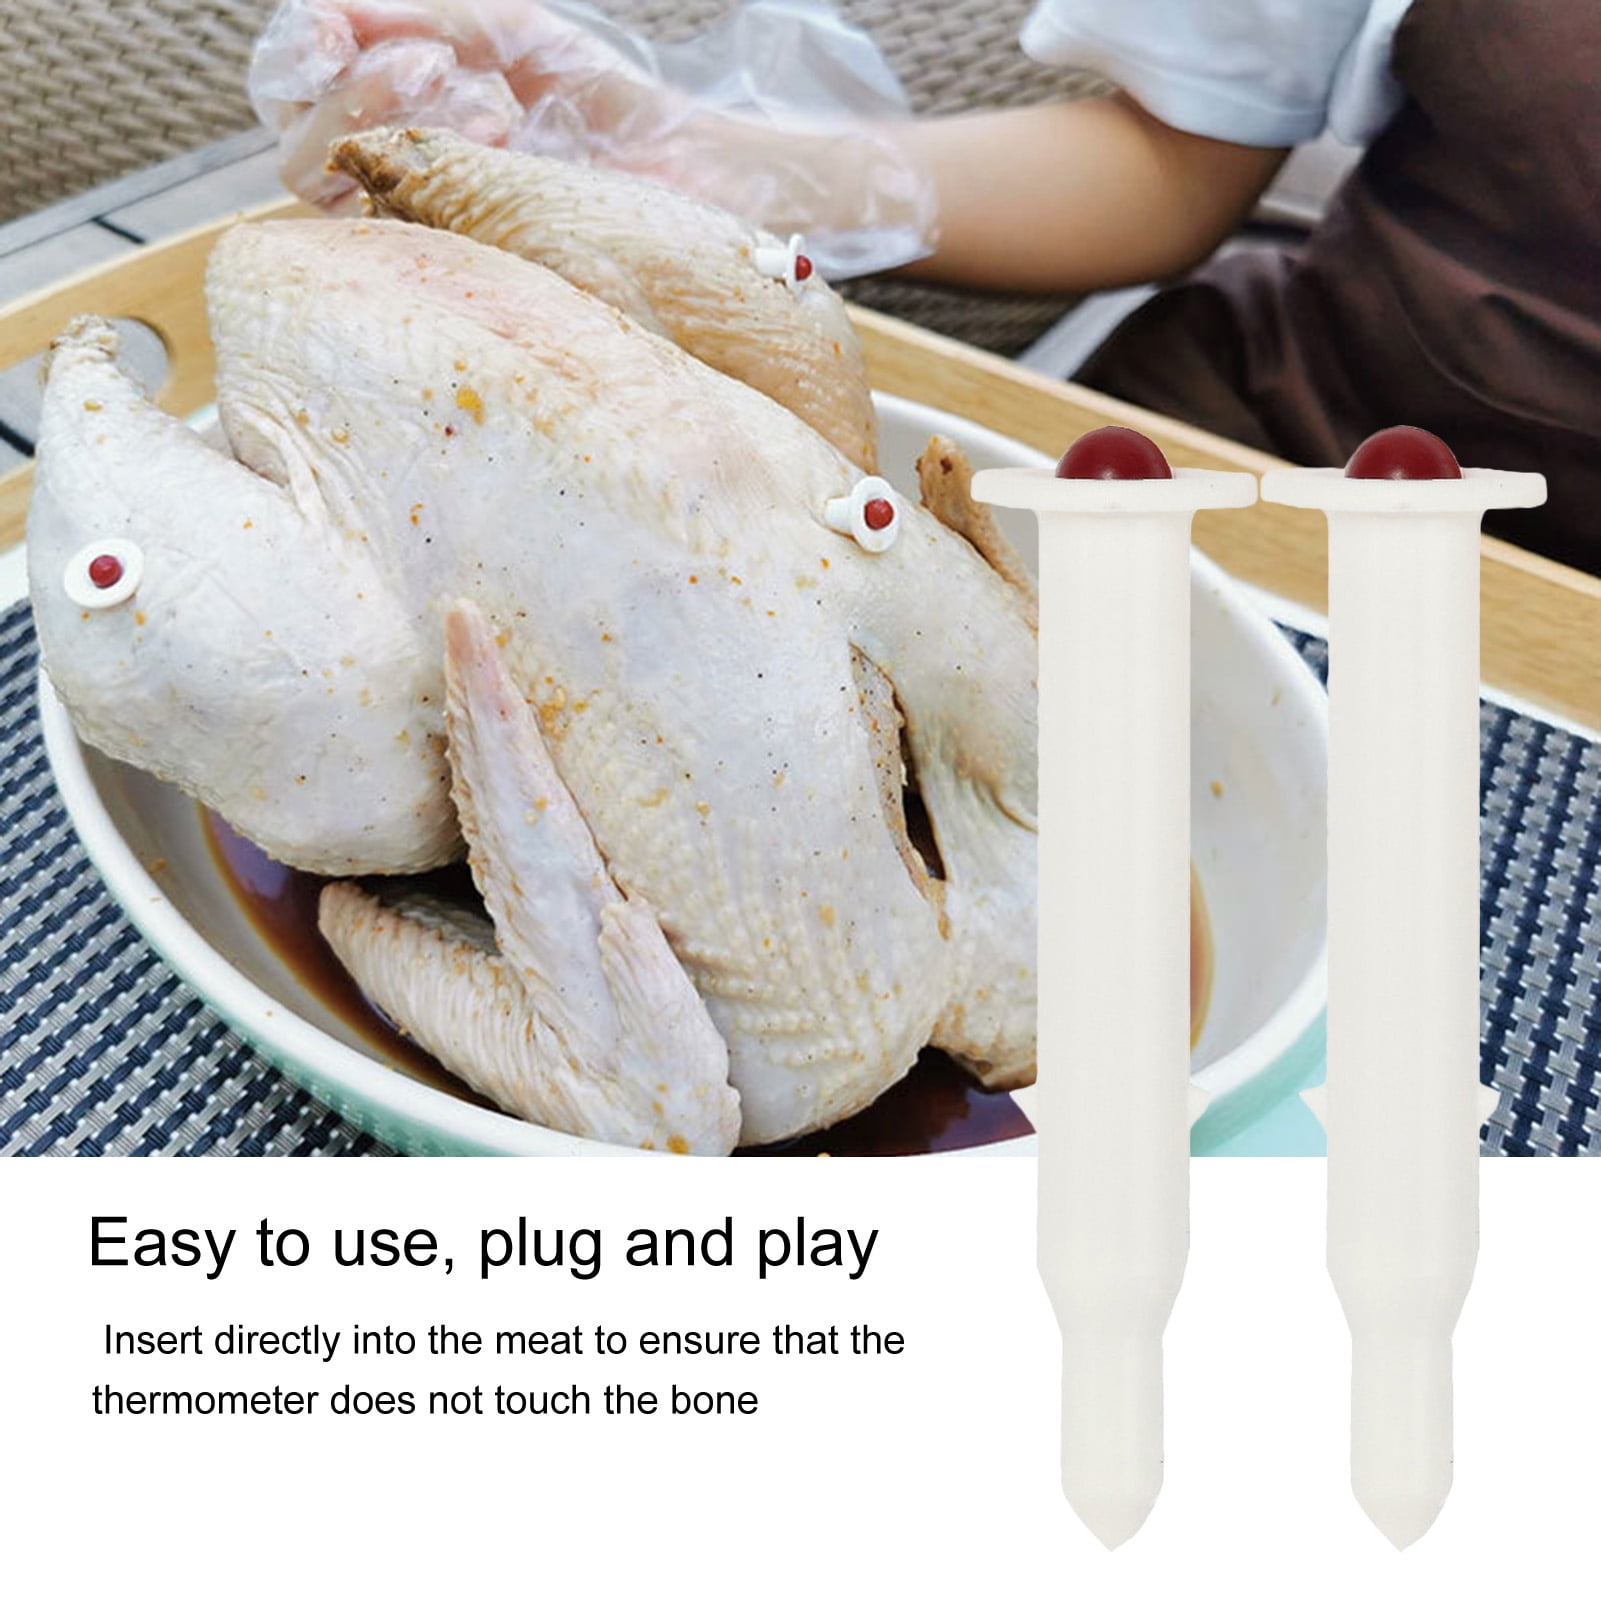  20pcs Turkey Timer, Pop Up Cooking Thermometer for